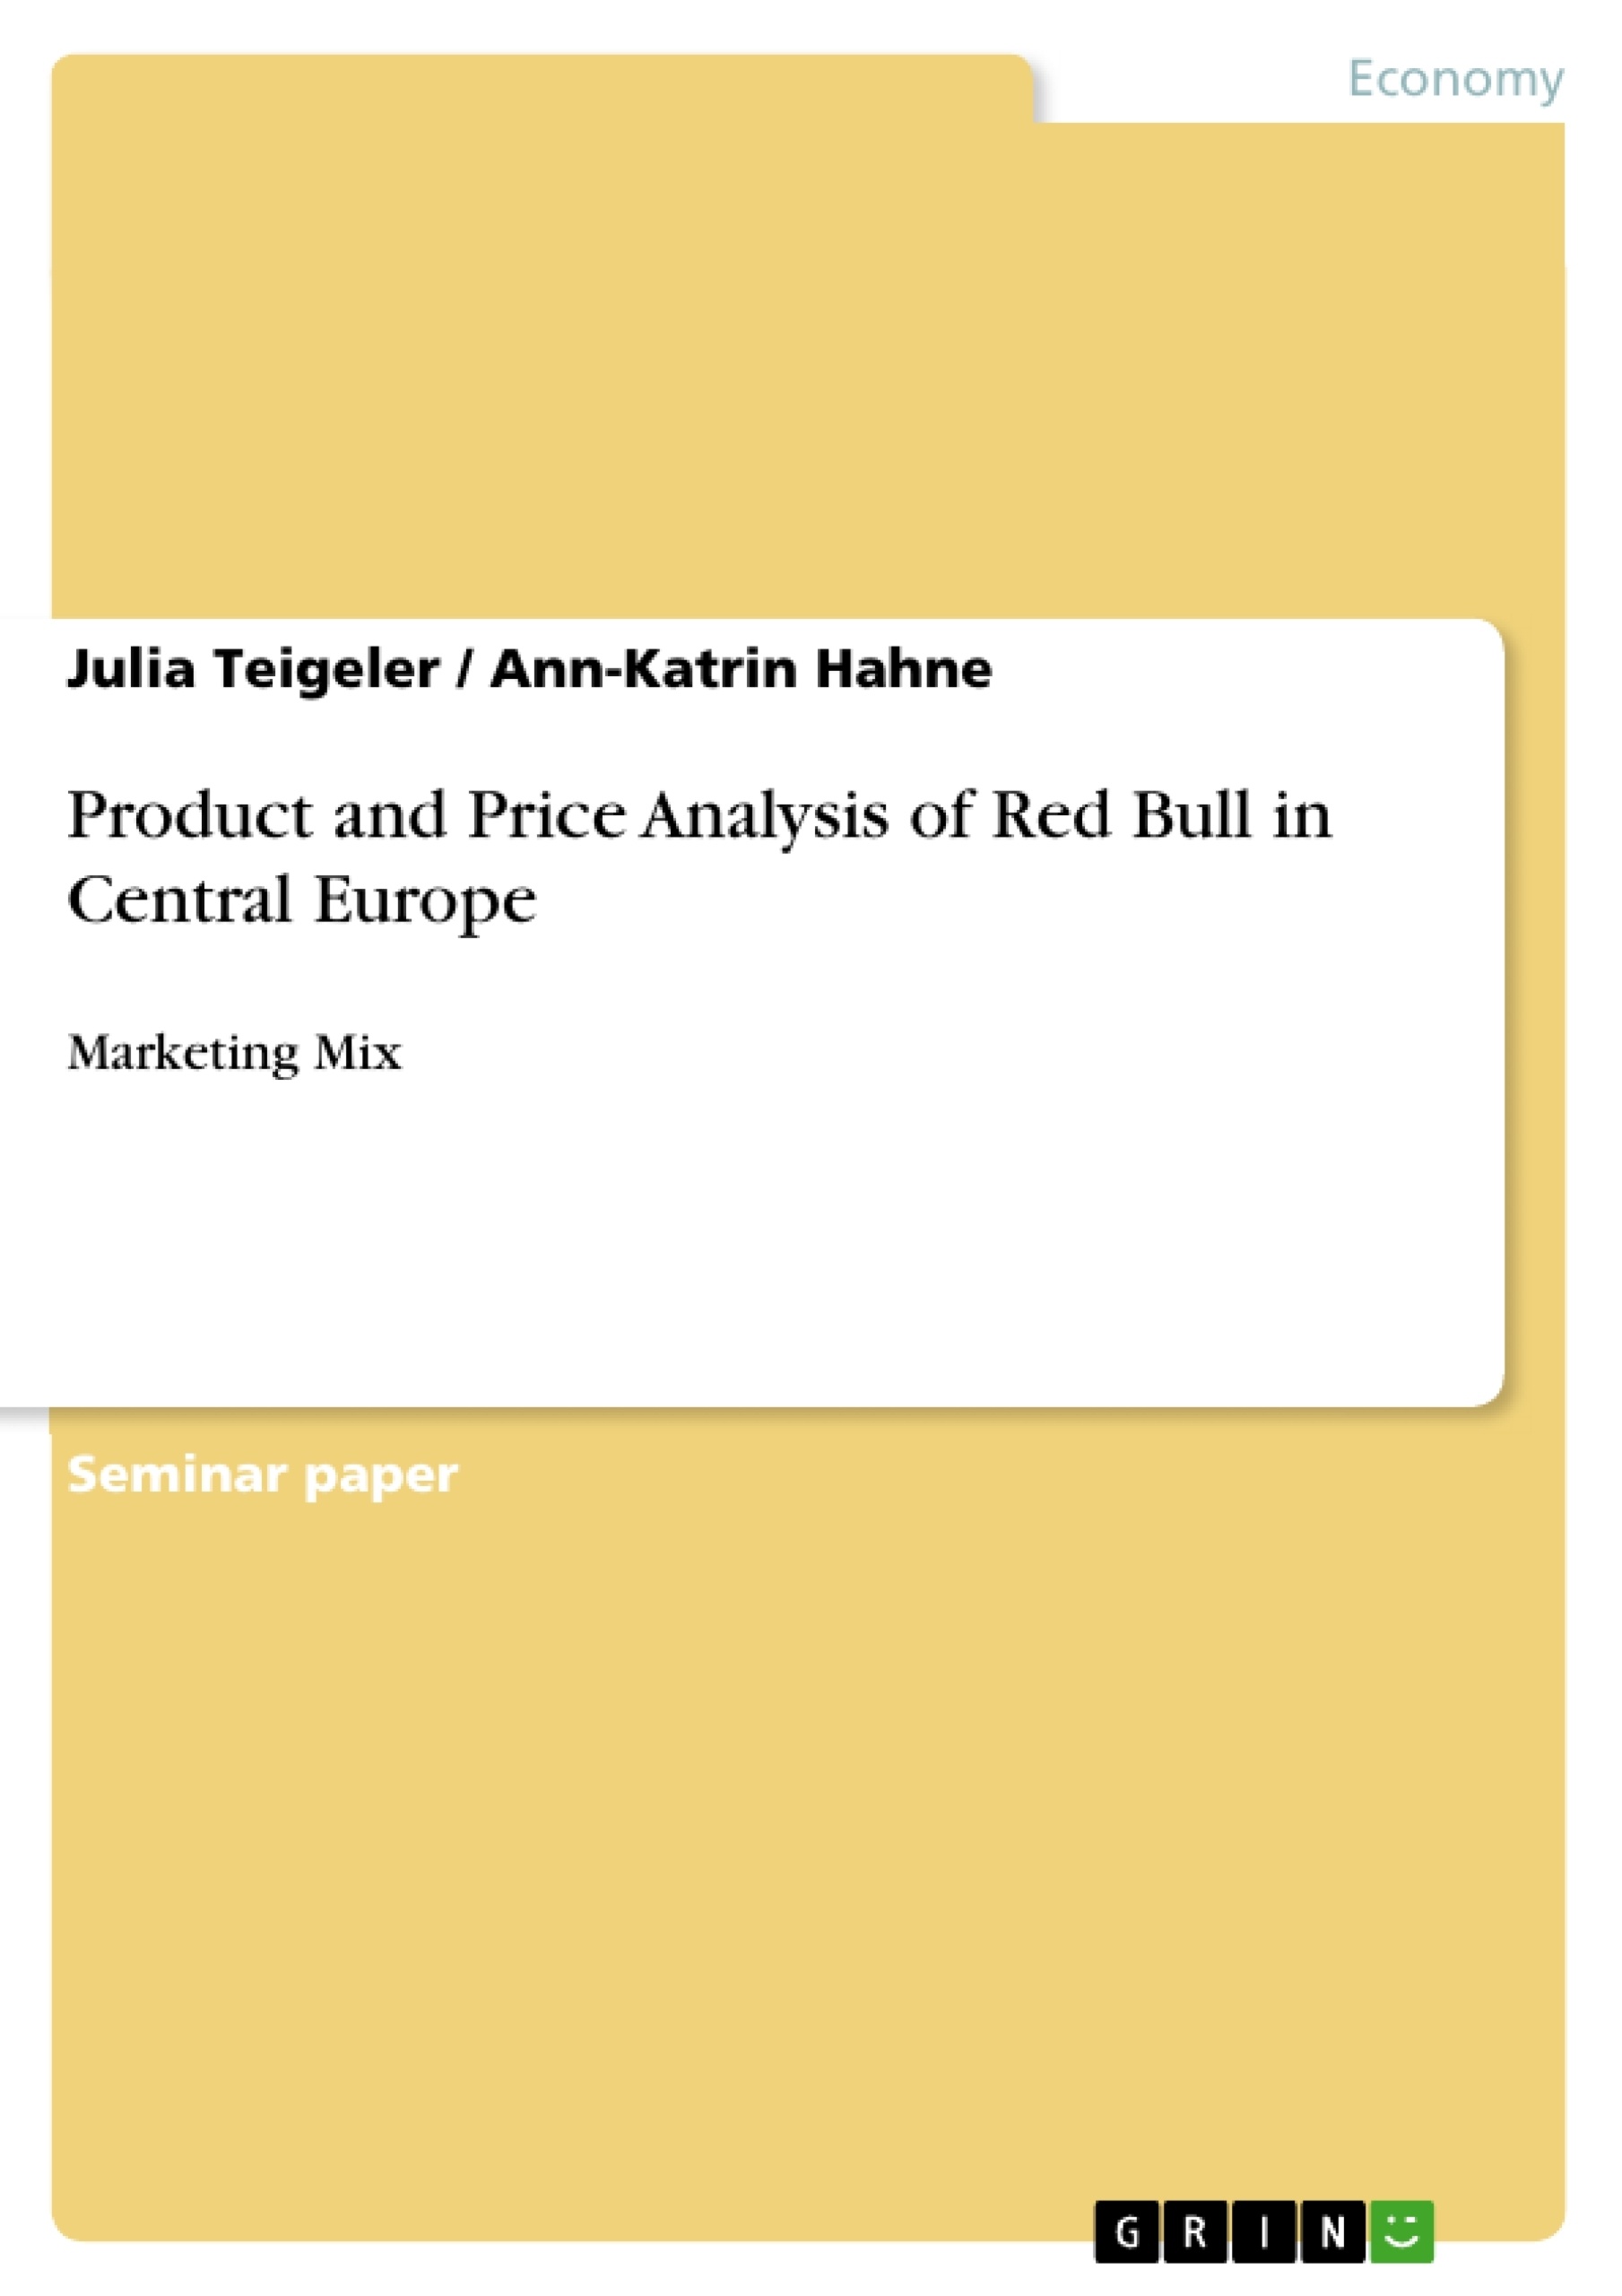 Título: Product and Price Analysis of Red Bull in Central Europe